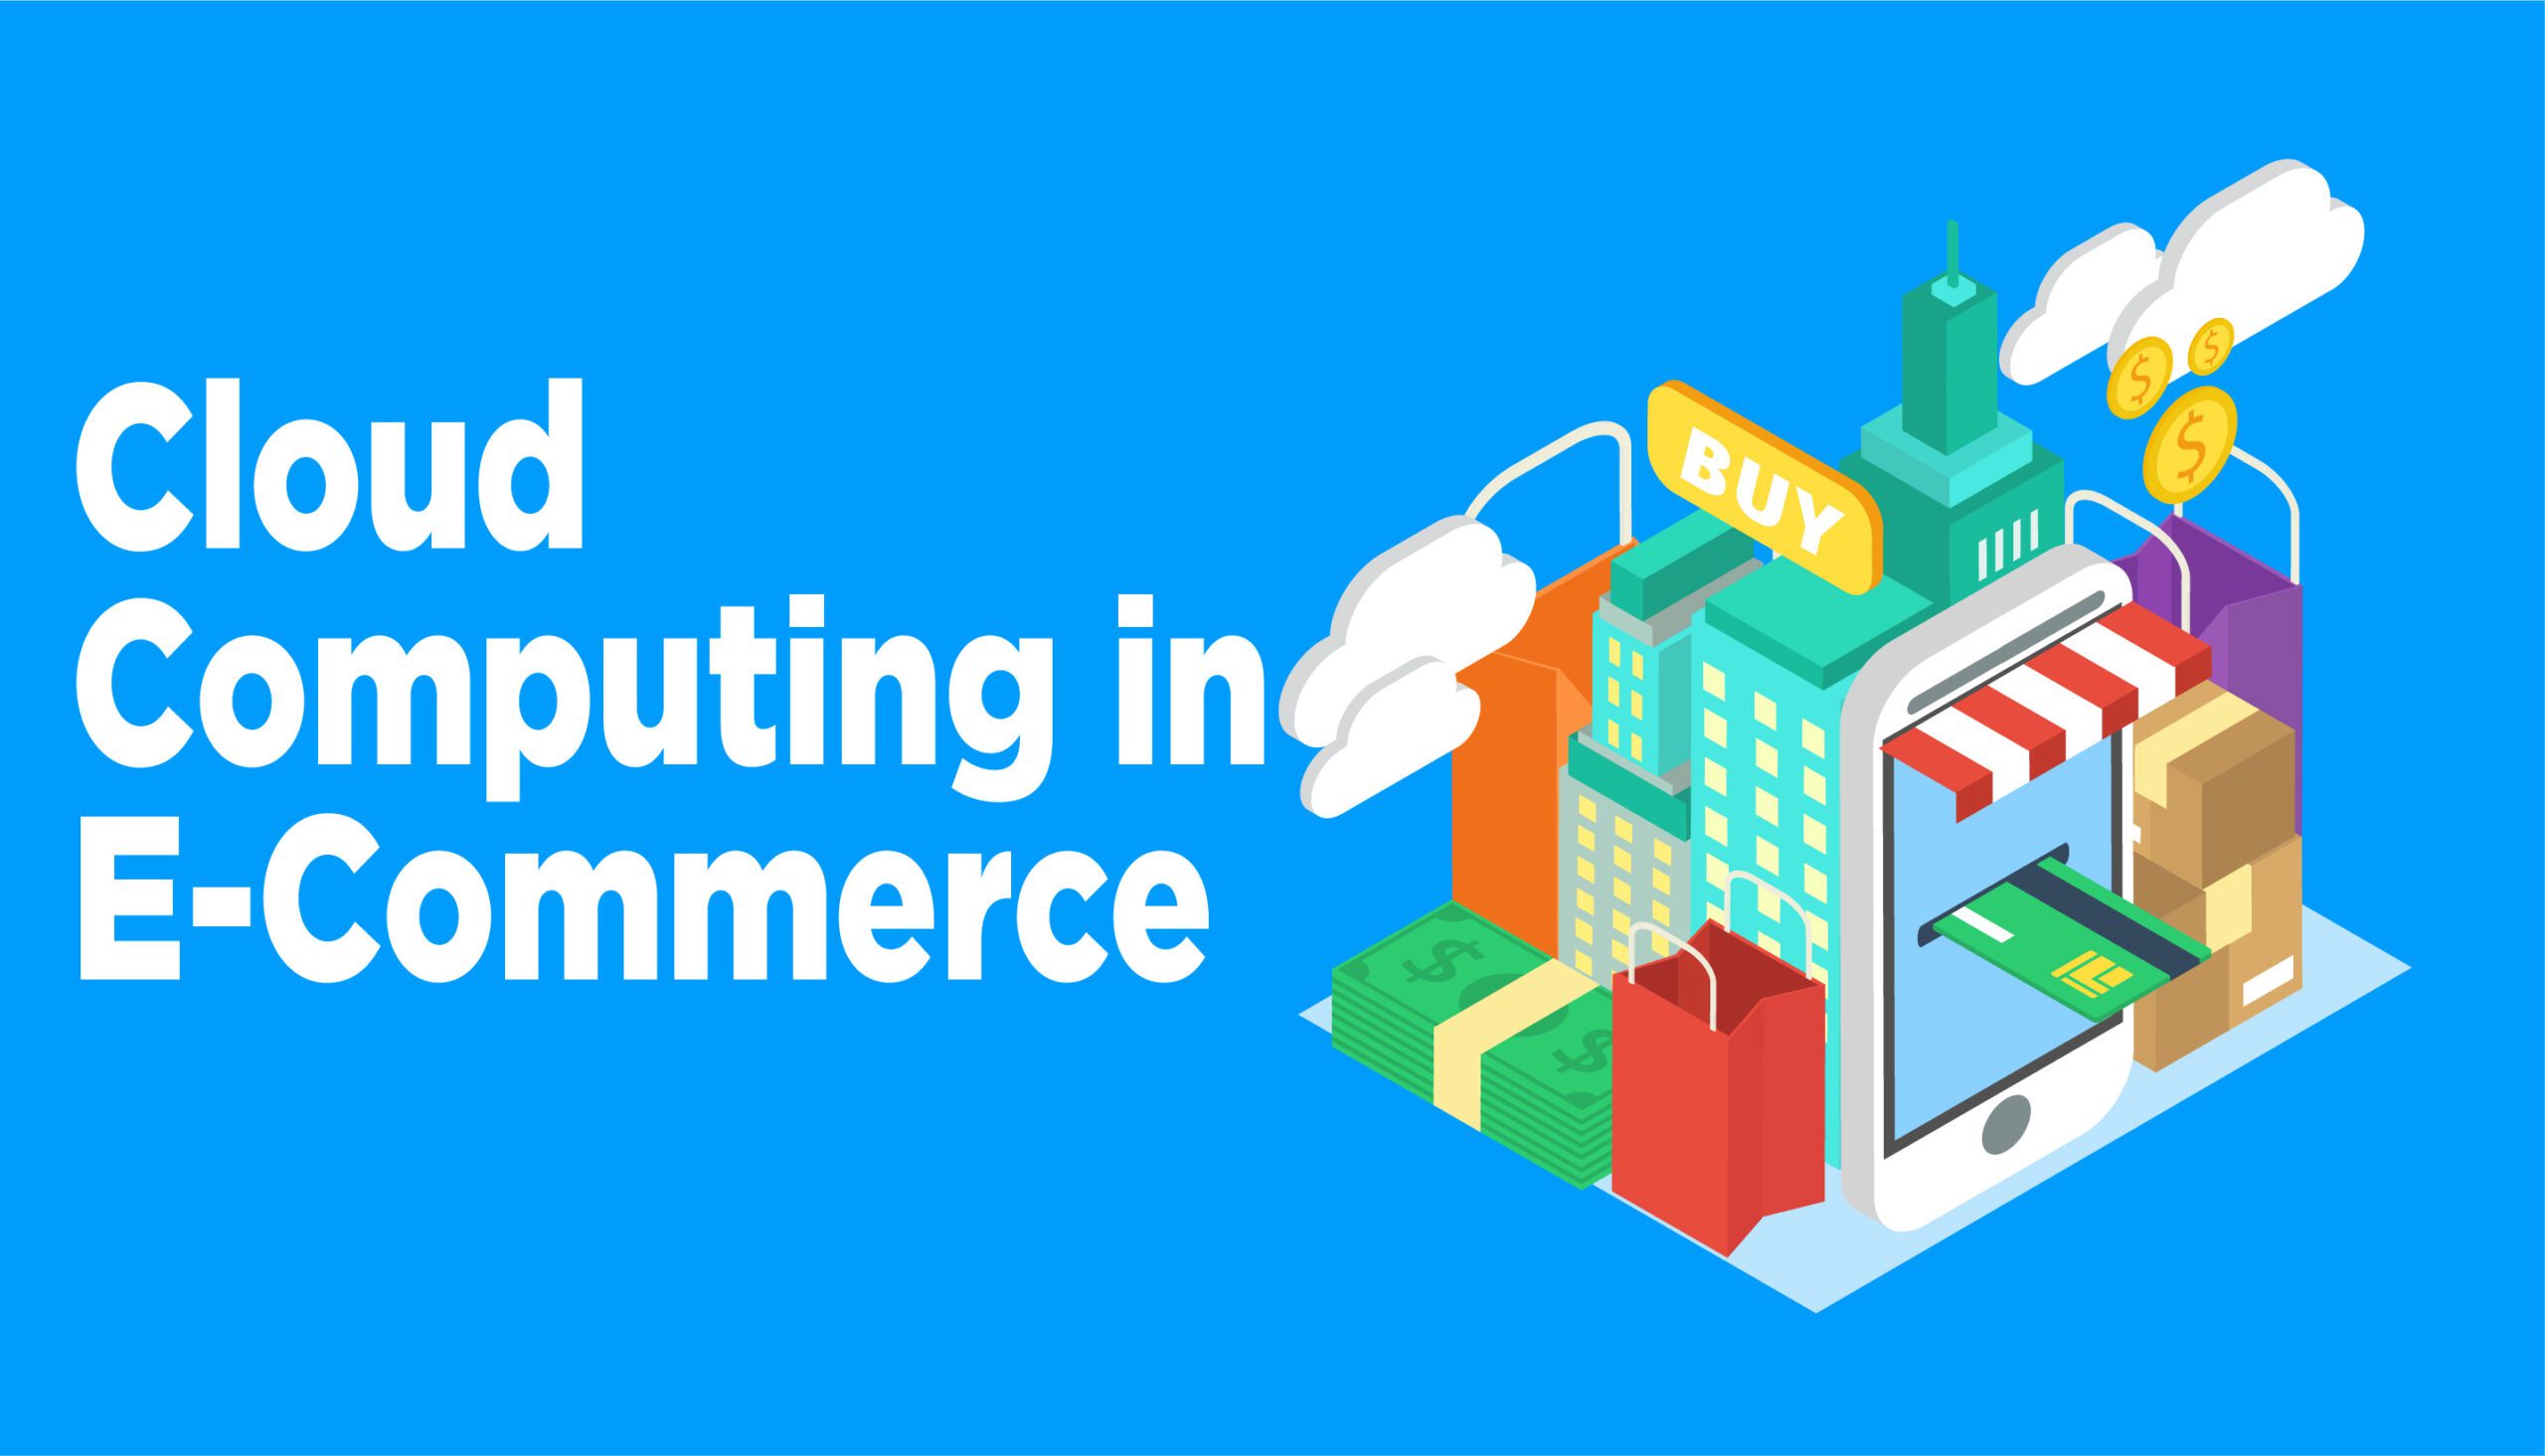 Introduction to Cloud Computing in E-commerce